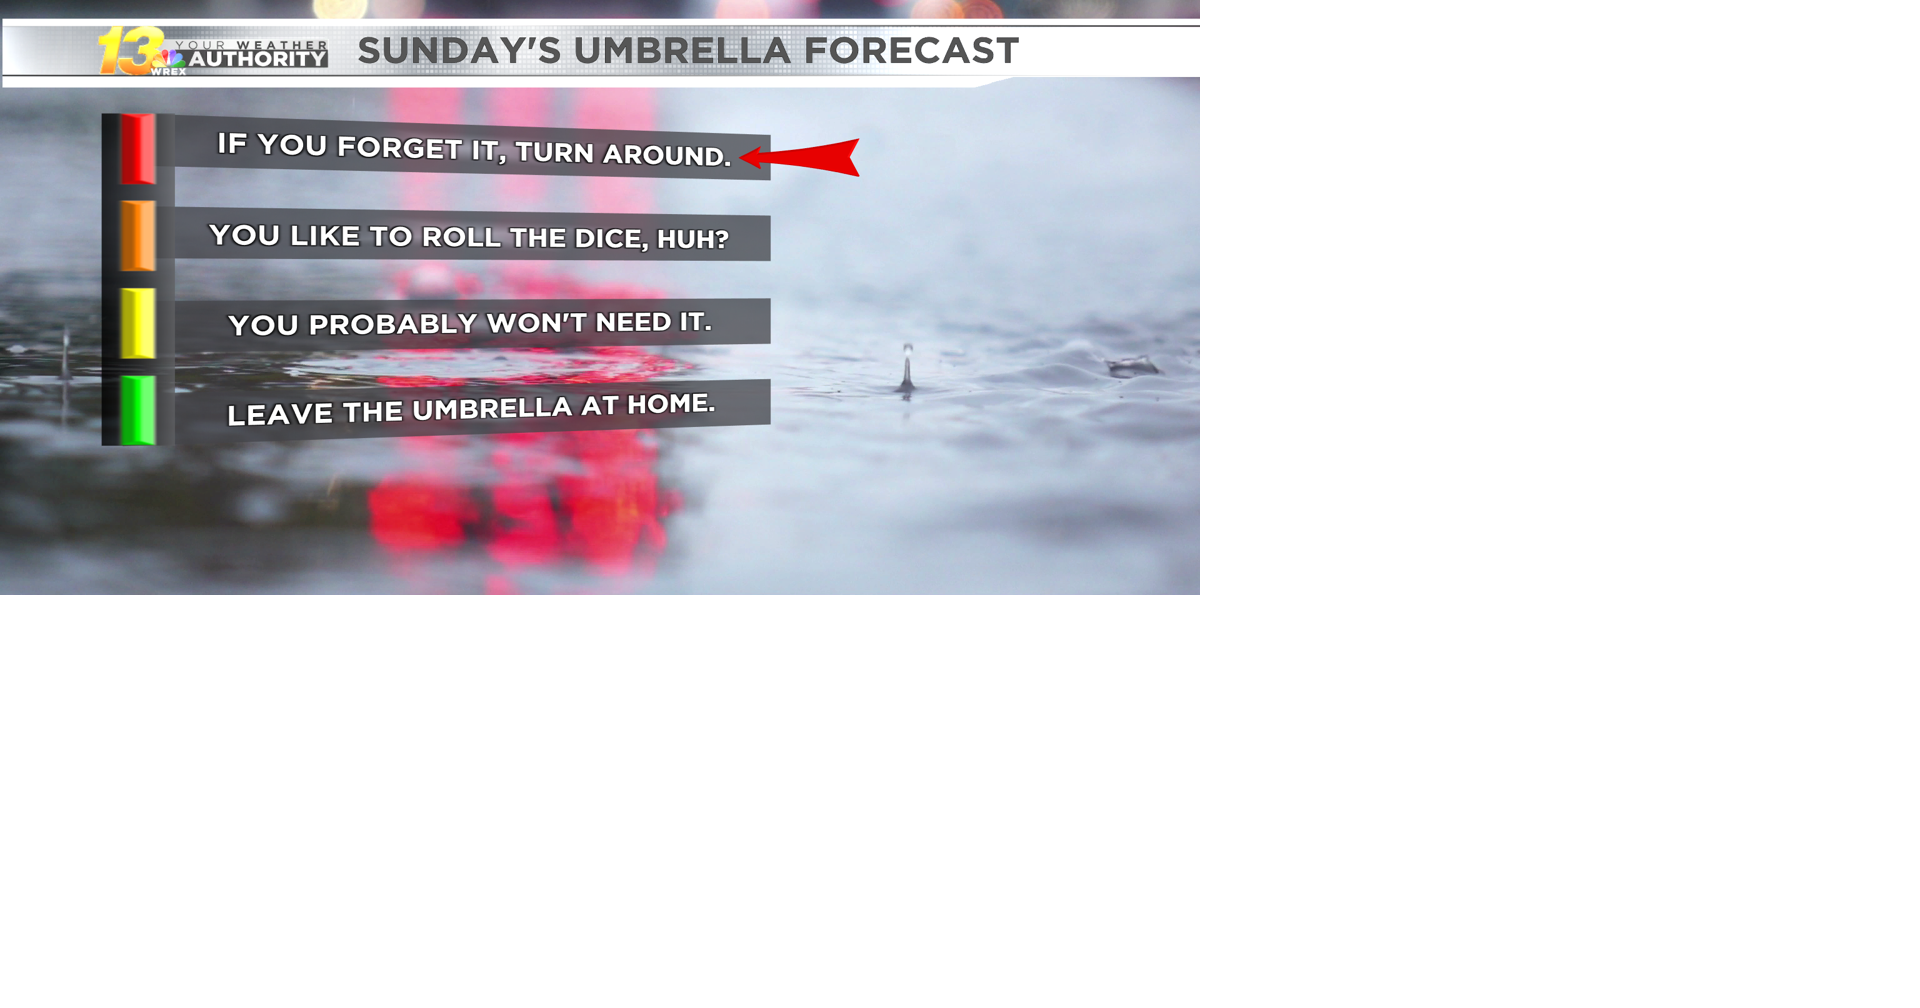 What If an Umbrella Warns You about Bad Weather Forecasts